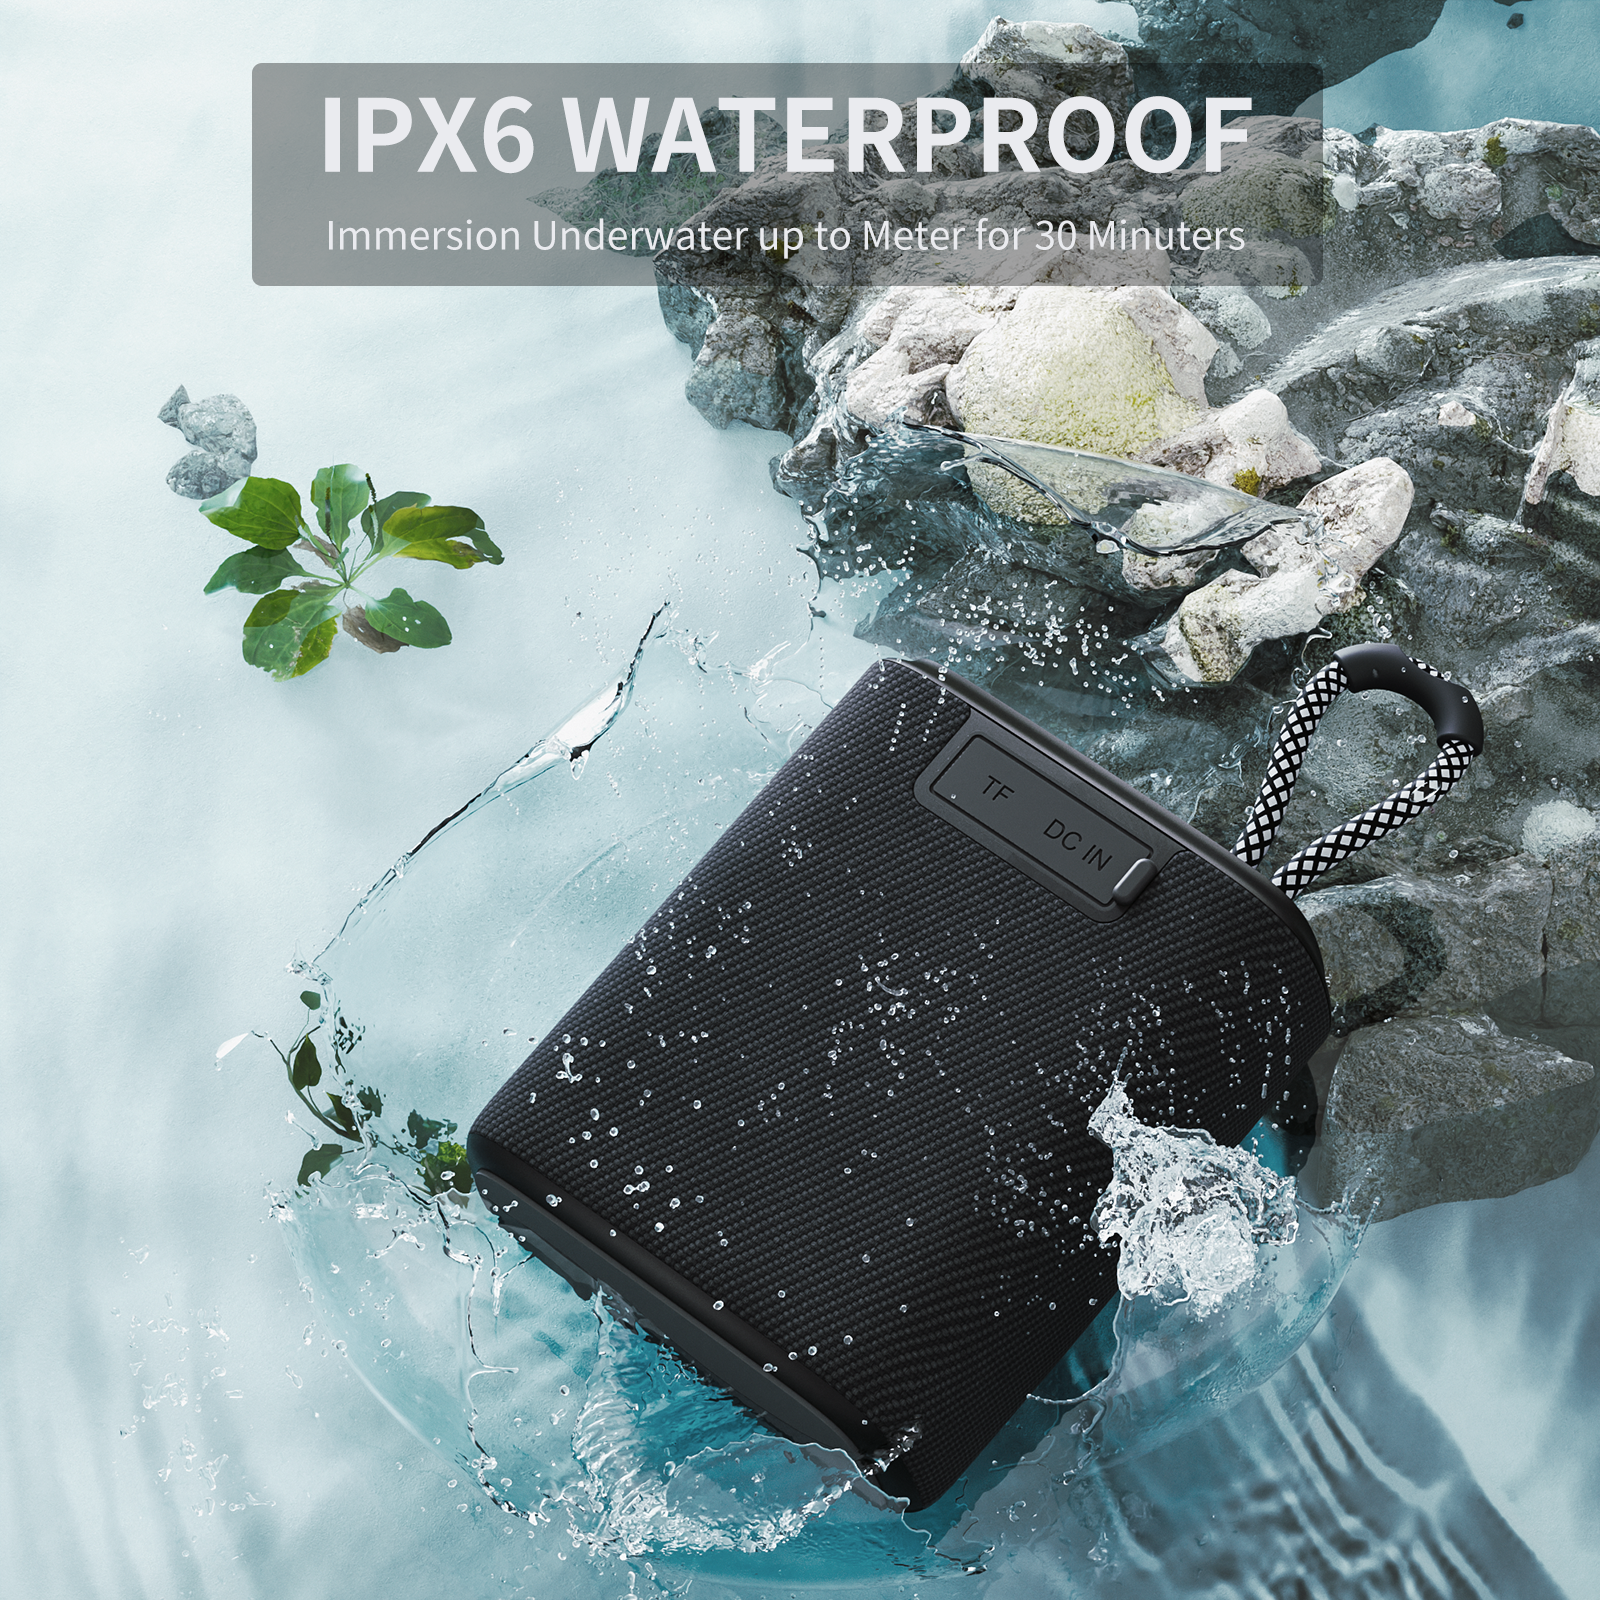 Portable IPX7 Waterproof Bluetooth Speaker, Shower Speaker FM Radio with HD Sound,Outdoor Speaker, TF Card SD Aux, 8H Playtime, True Wireless Stereo,Black - image 4 of 7